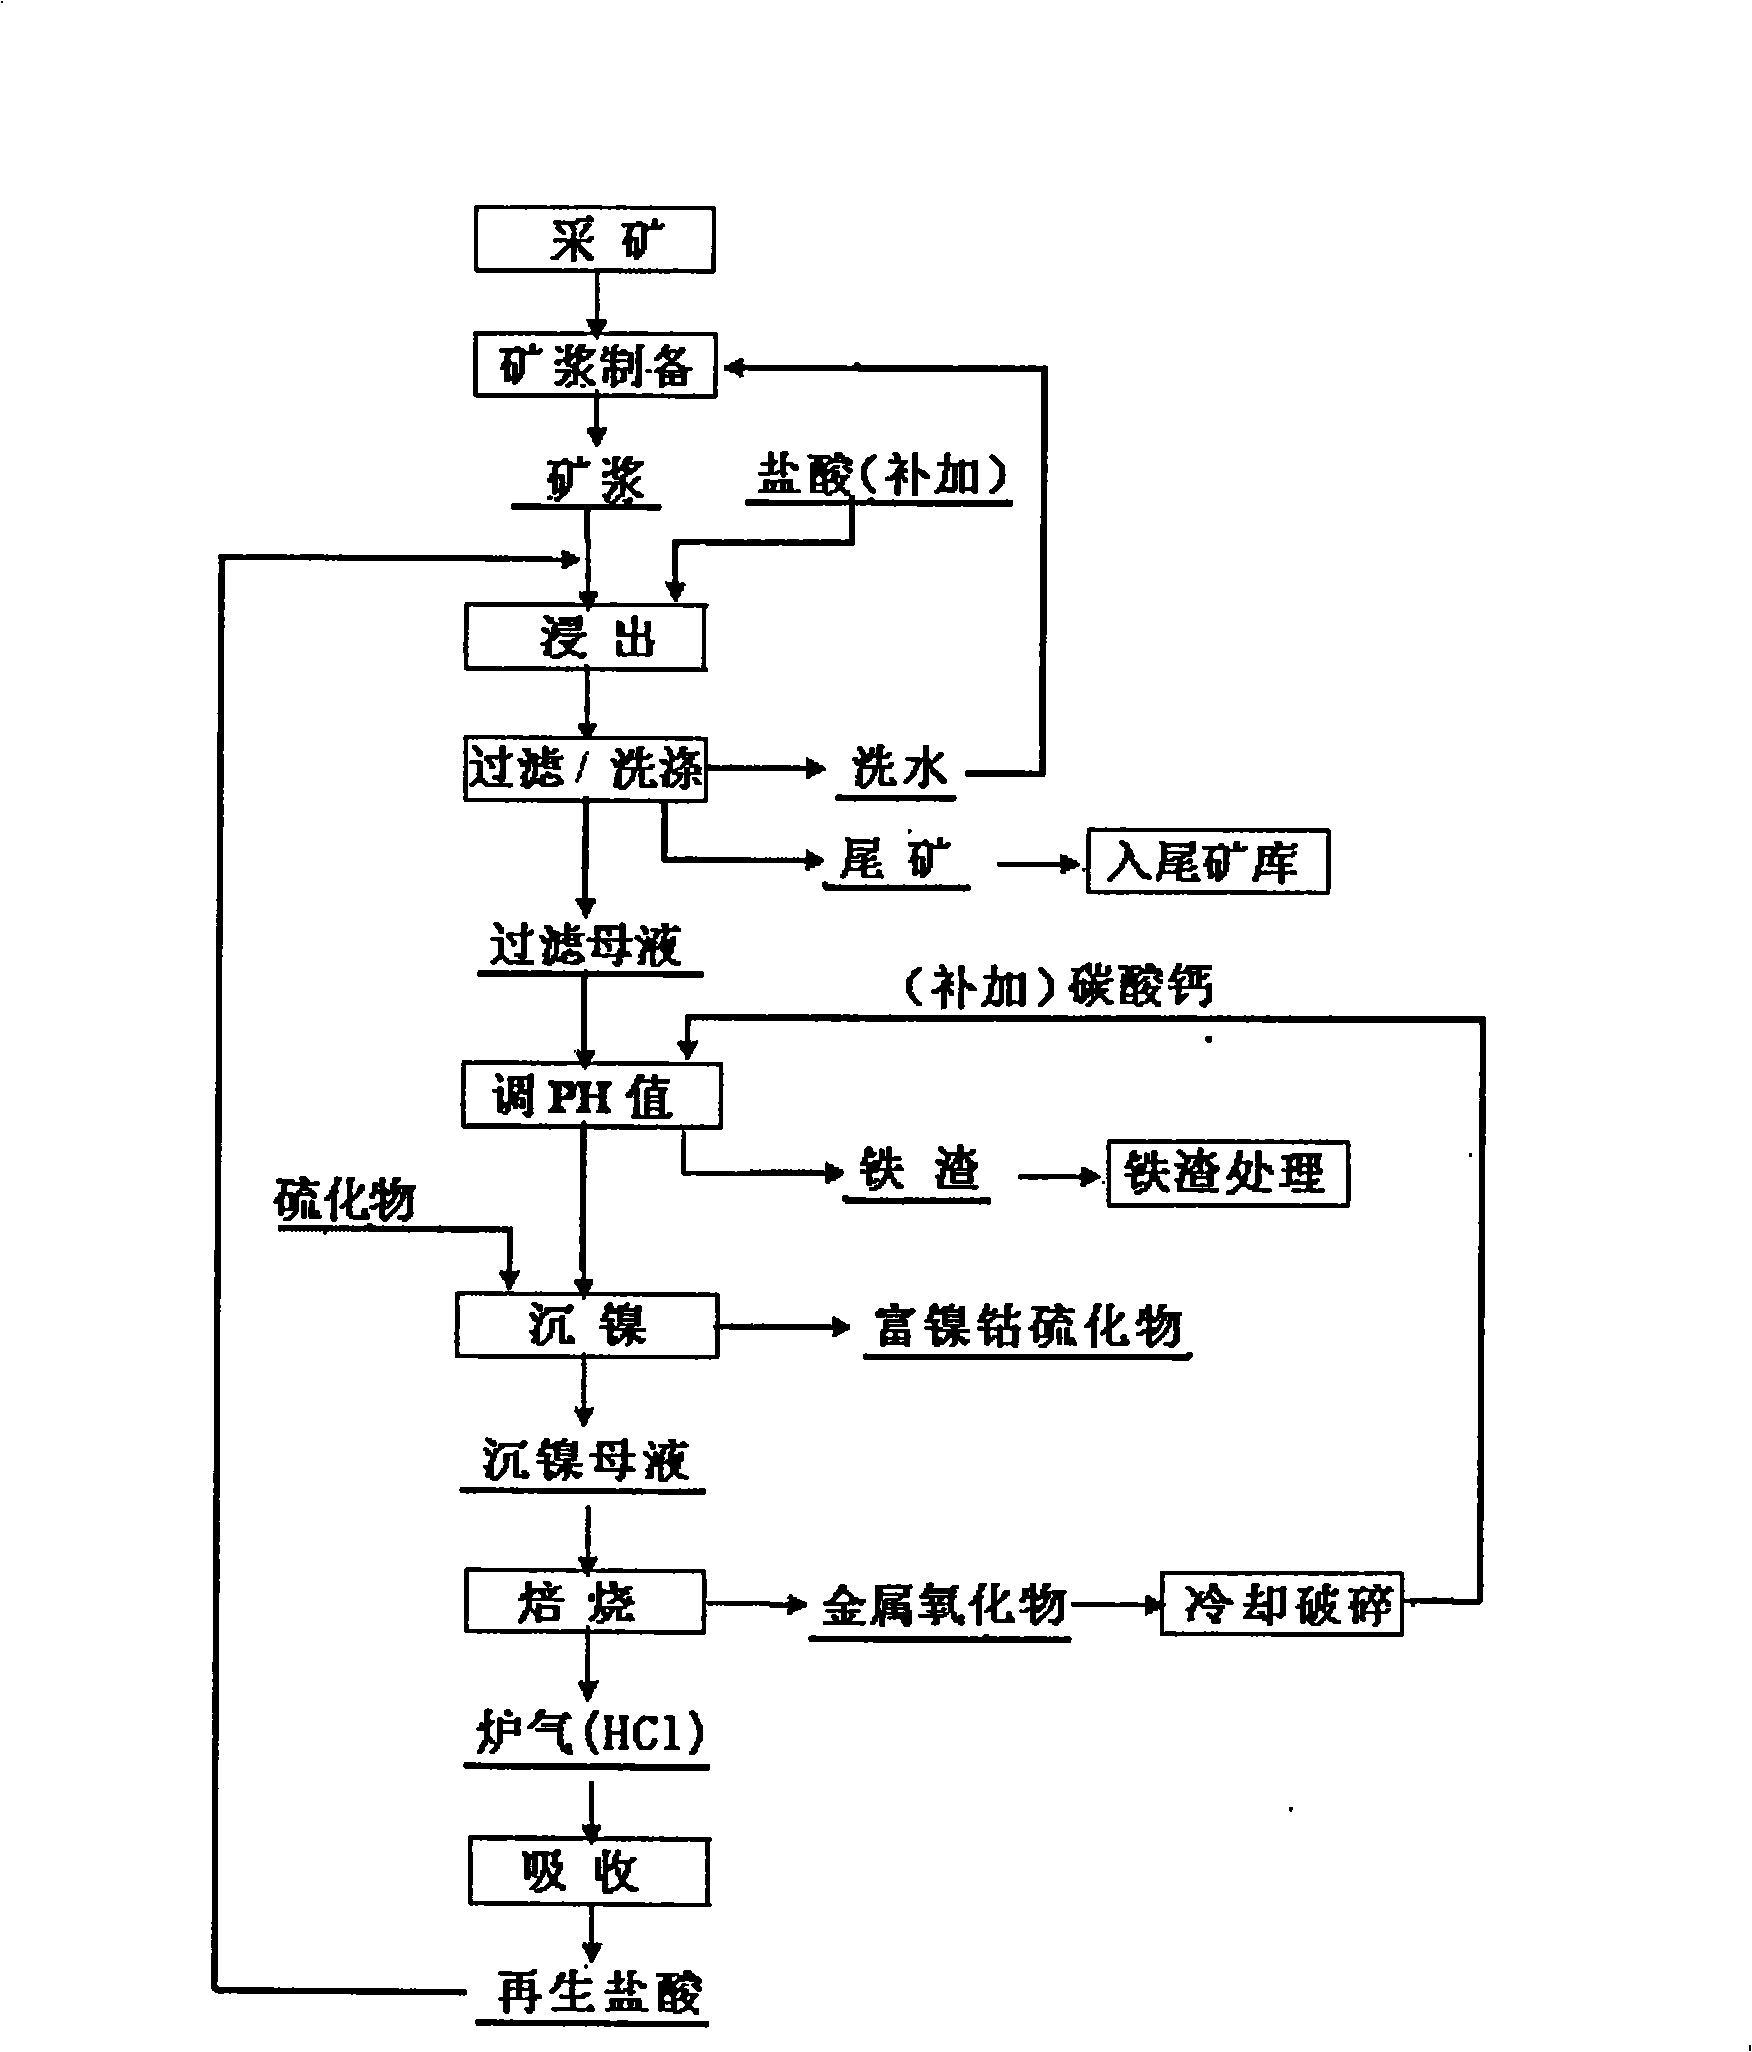 Process for extracting nickel and cobalt from laterite-nickel ore